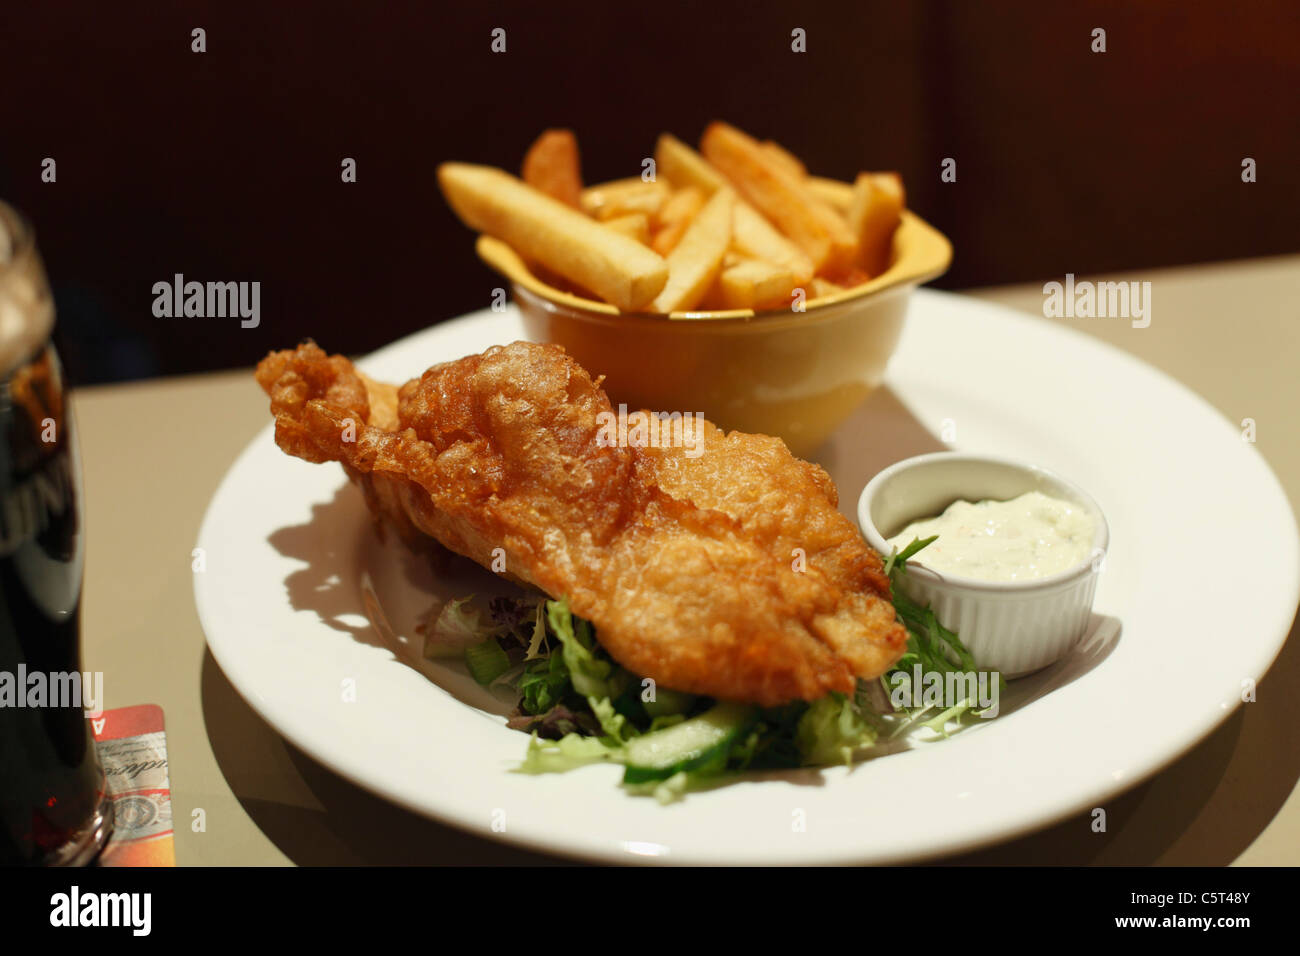 Republic of Ireland, County Fingal, Skerries, Close up of fish and chips in plate Stock Photo